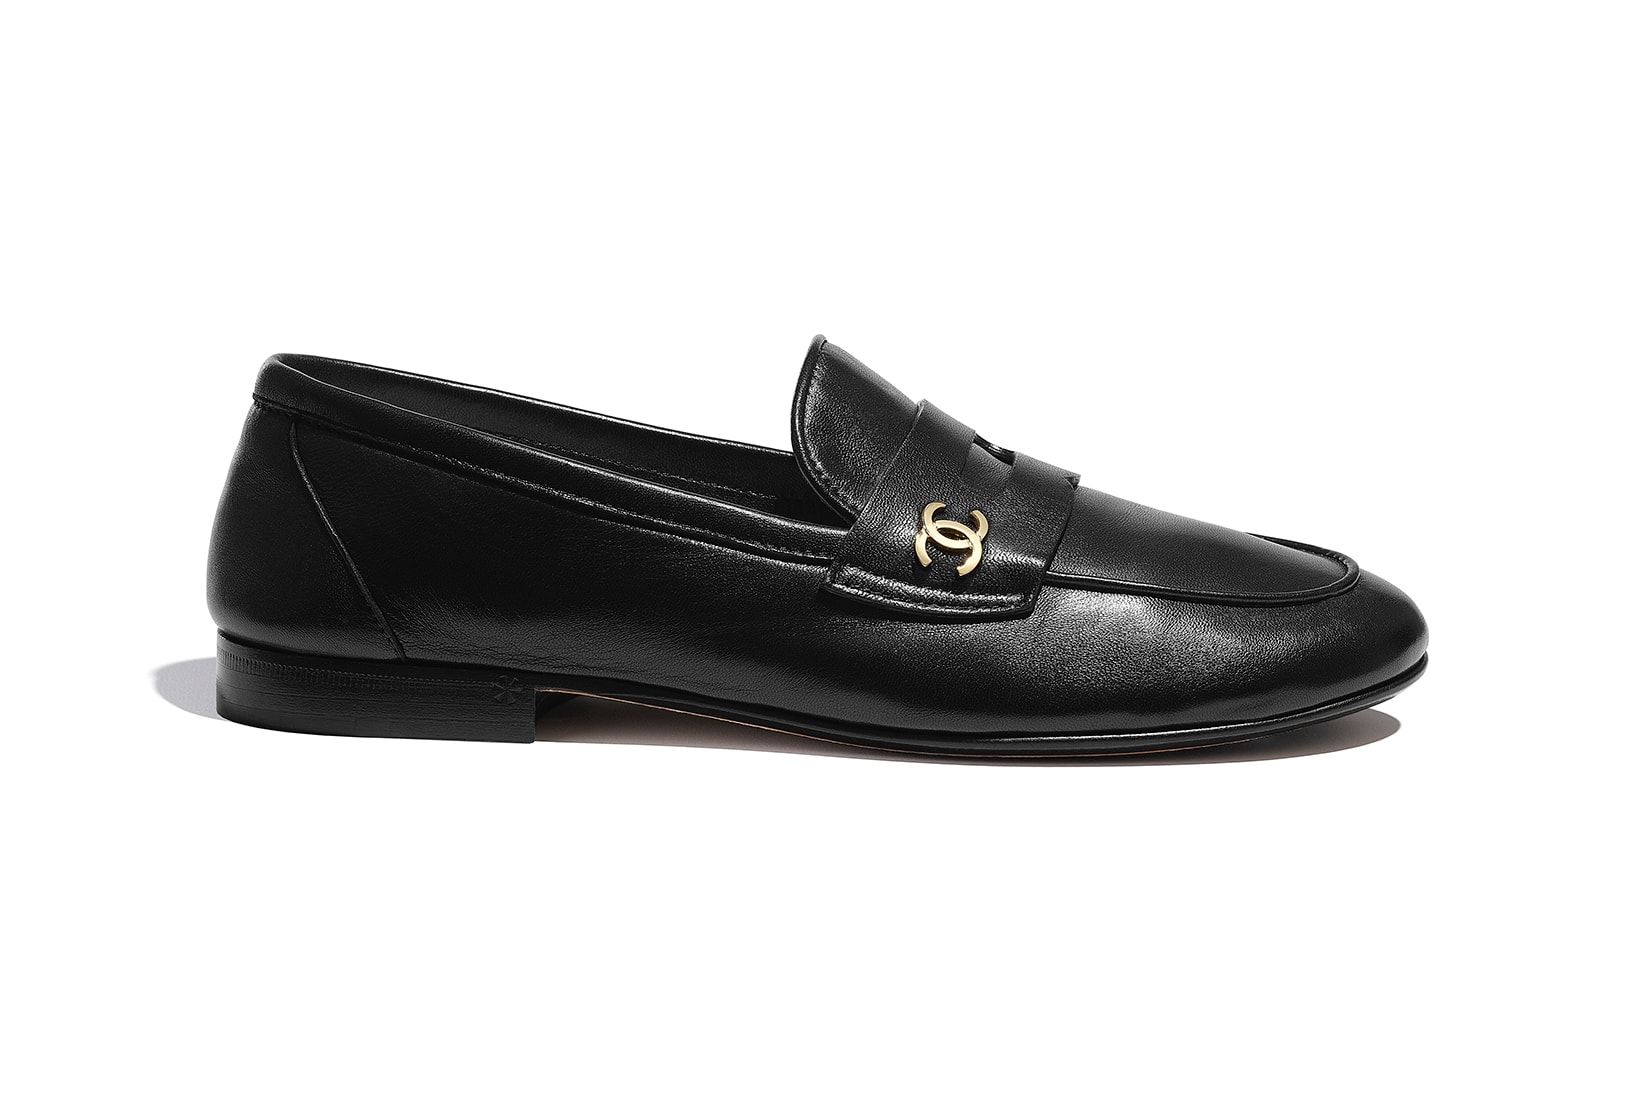 Chanel Womens Loafer & Moccasin Shoes, Black, 21